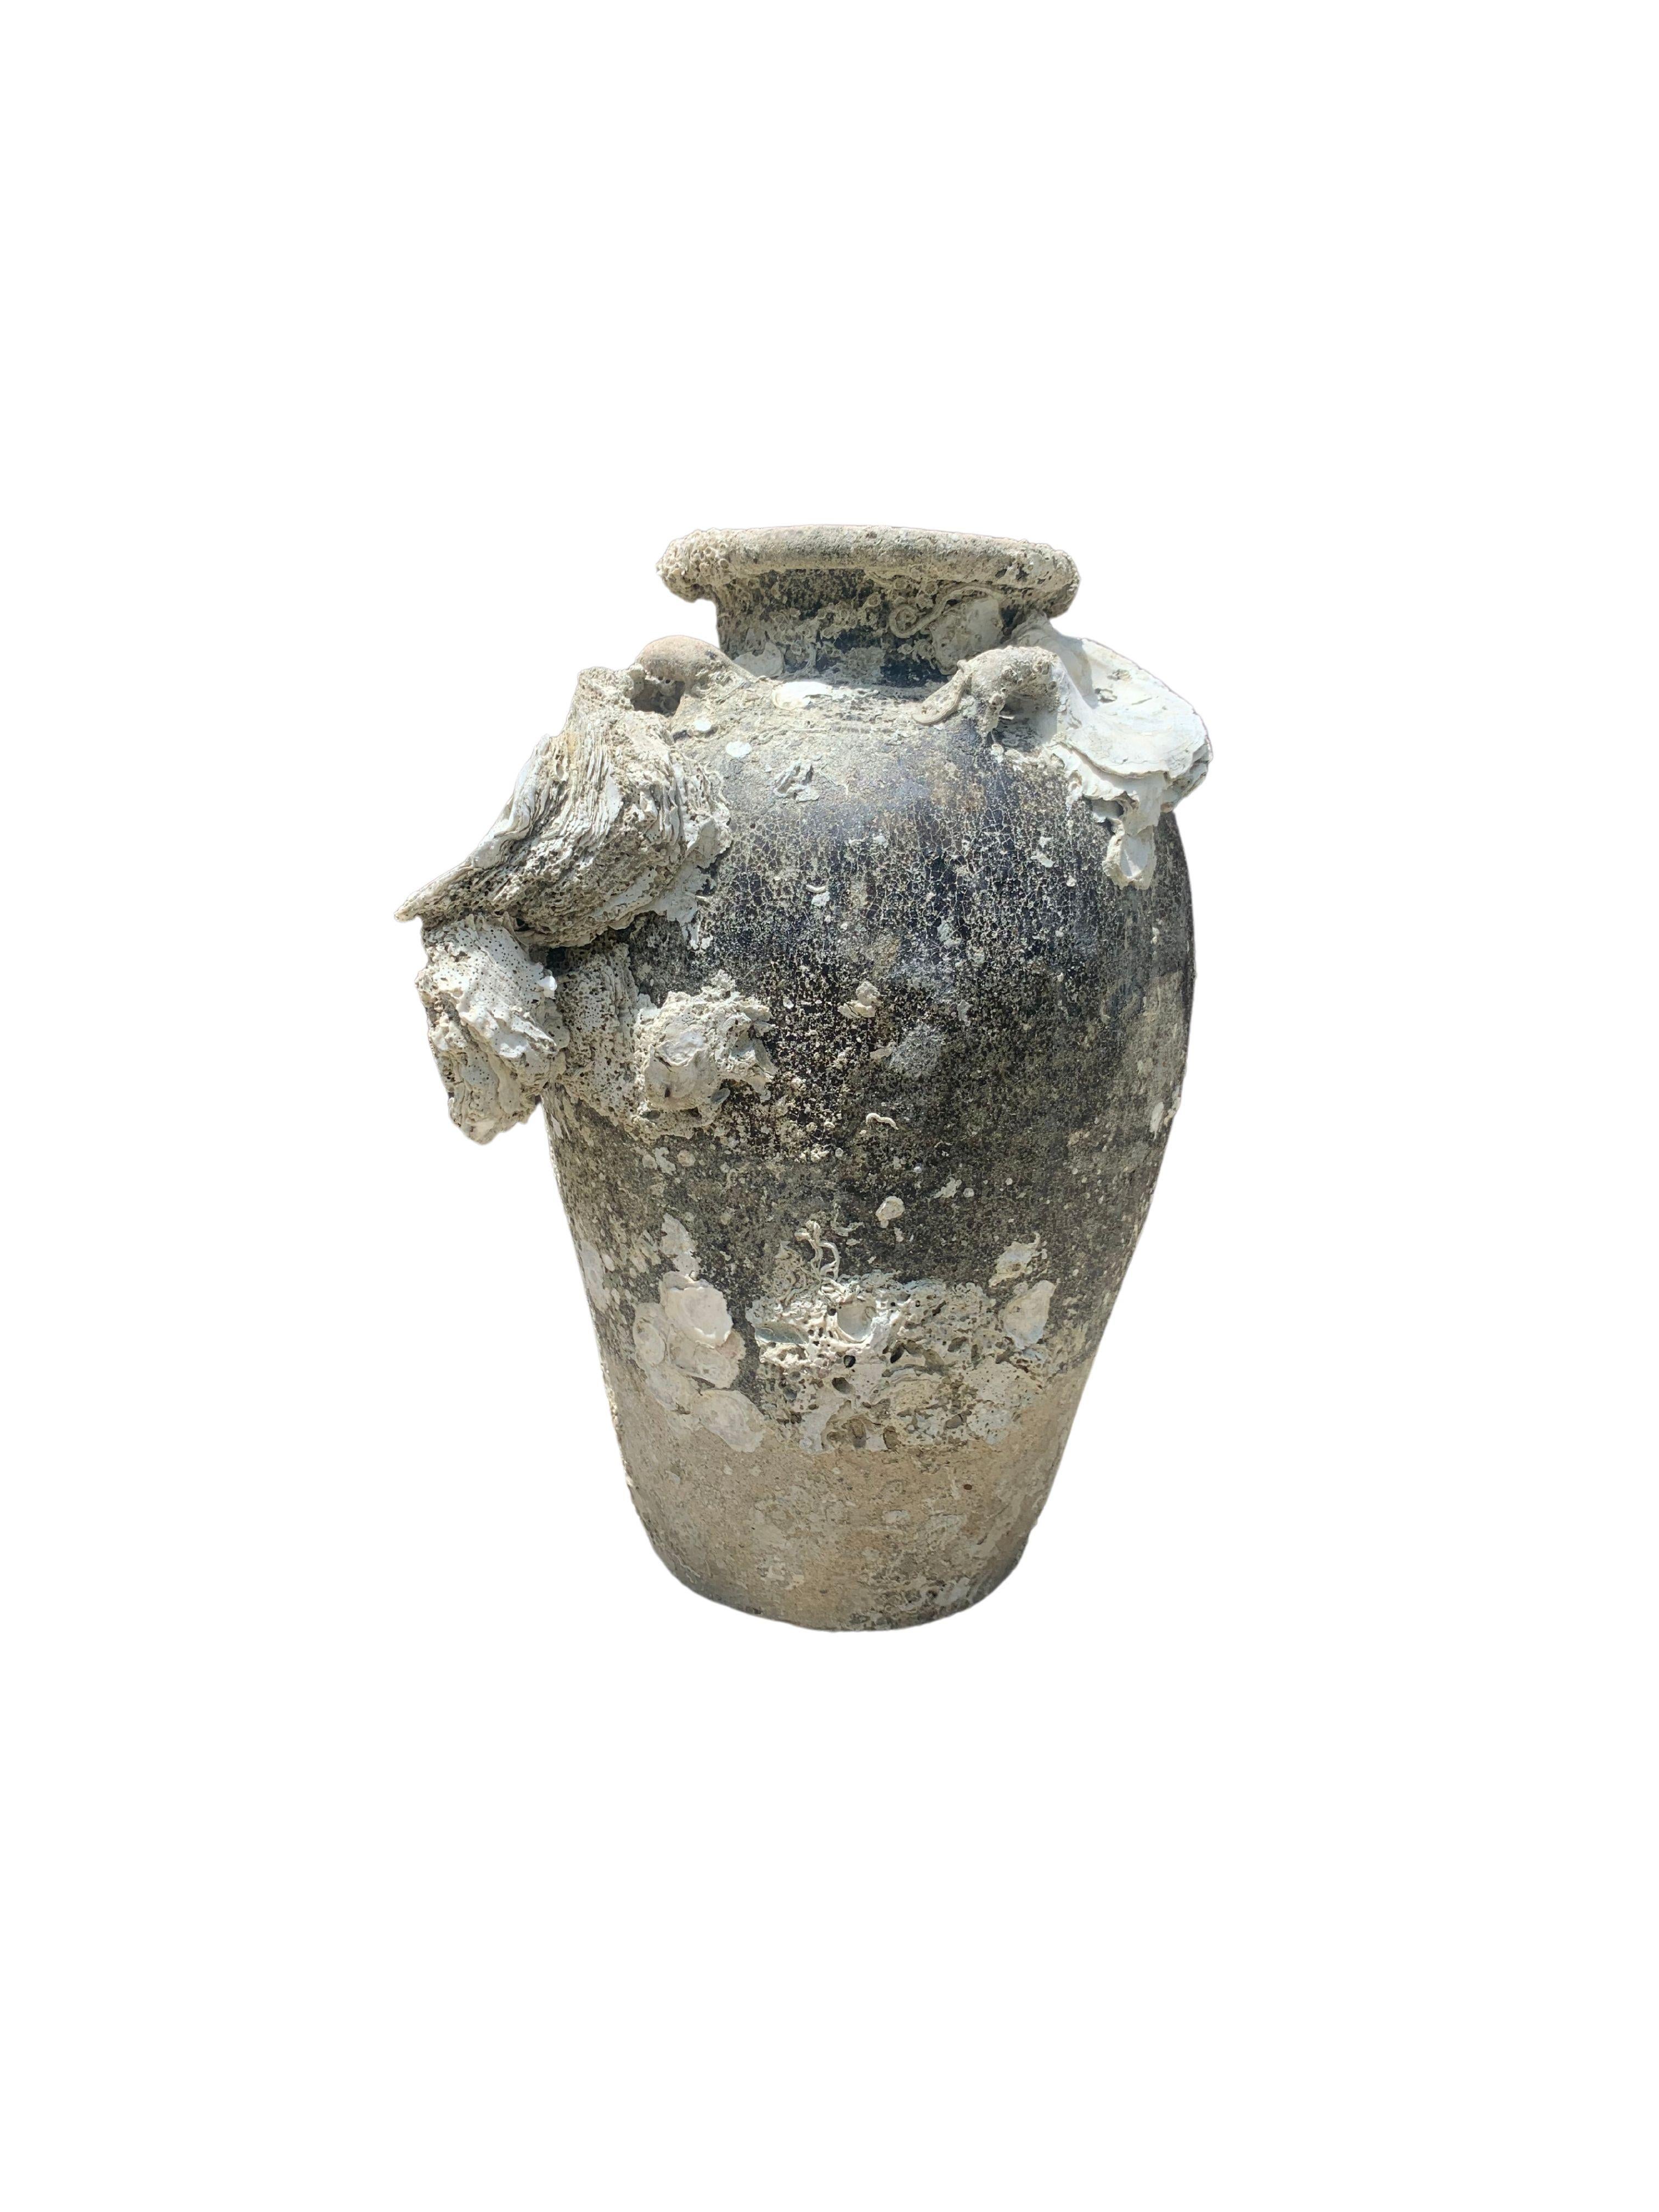 A wonderful example of a 19th Century Sawankhalok jar from a Shipwreck off the Coast of the Indonesian Island of Batam. Batam was one of the most substantial and influential ports in the South China Sea where an abundance of trade was conducted.